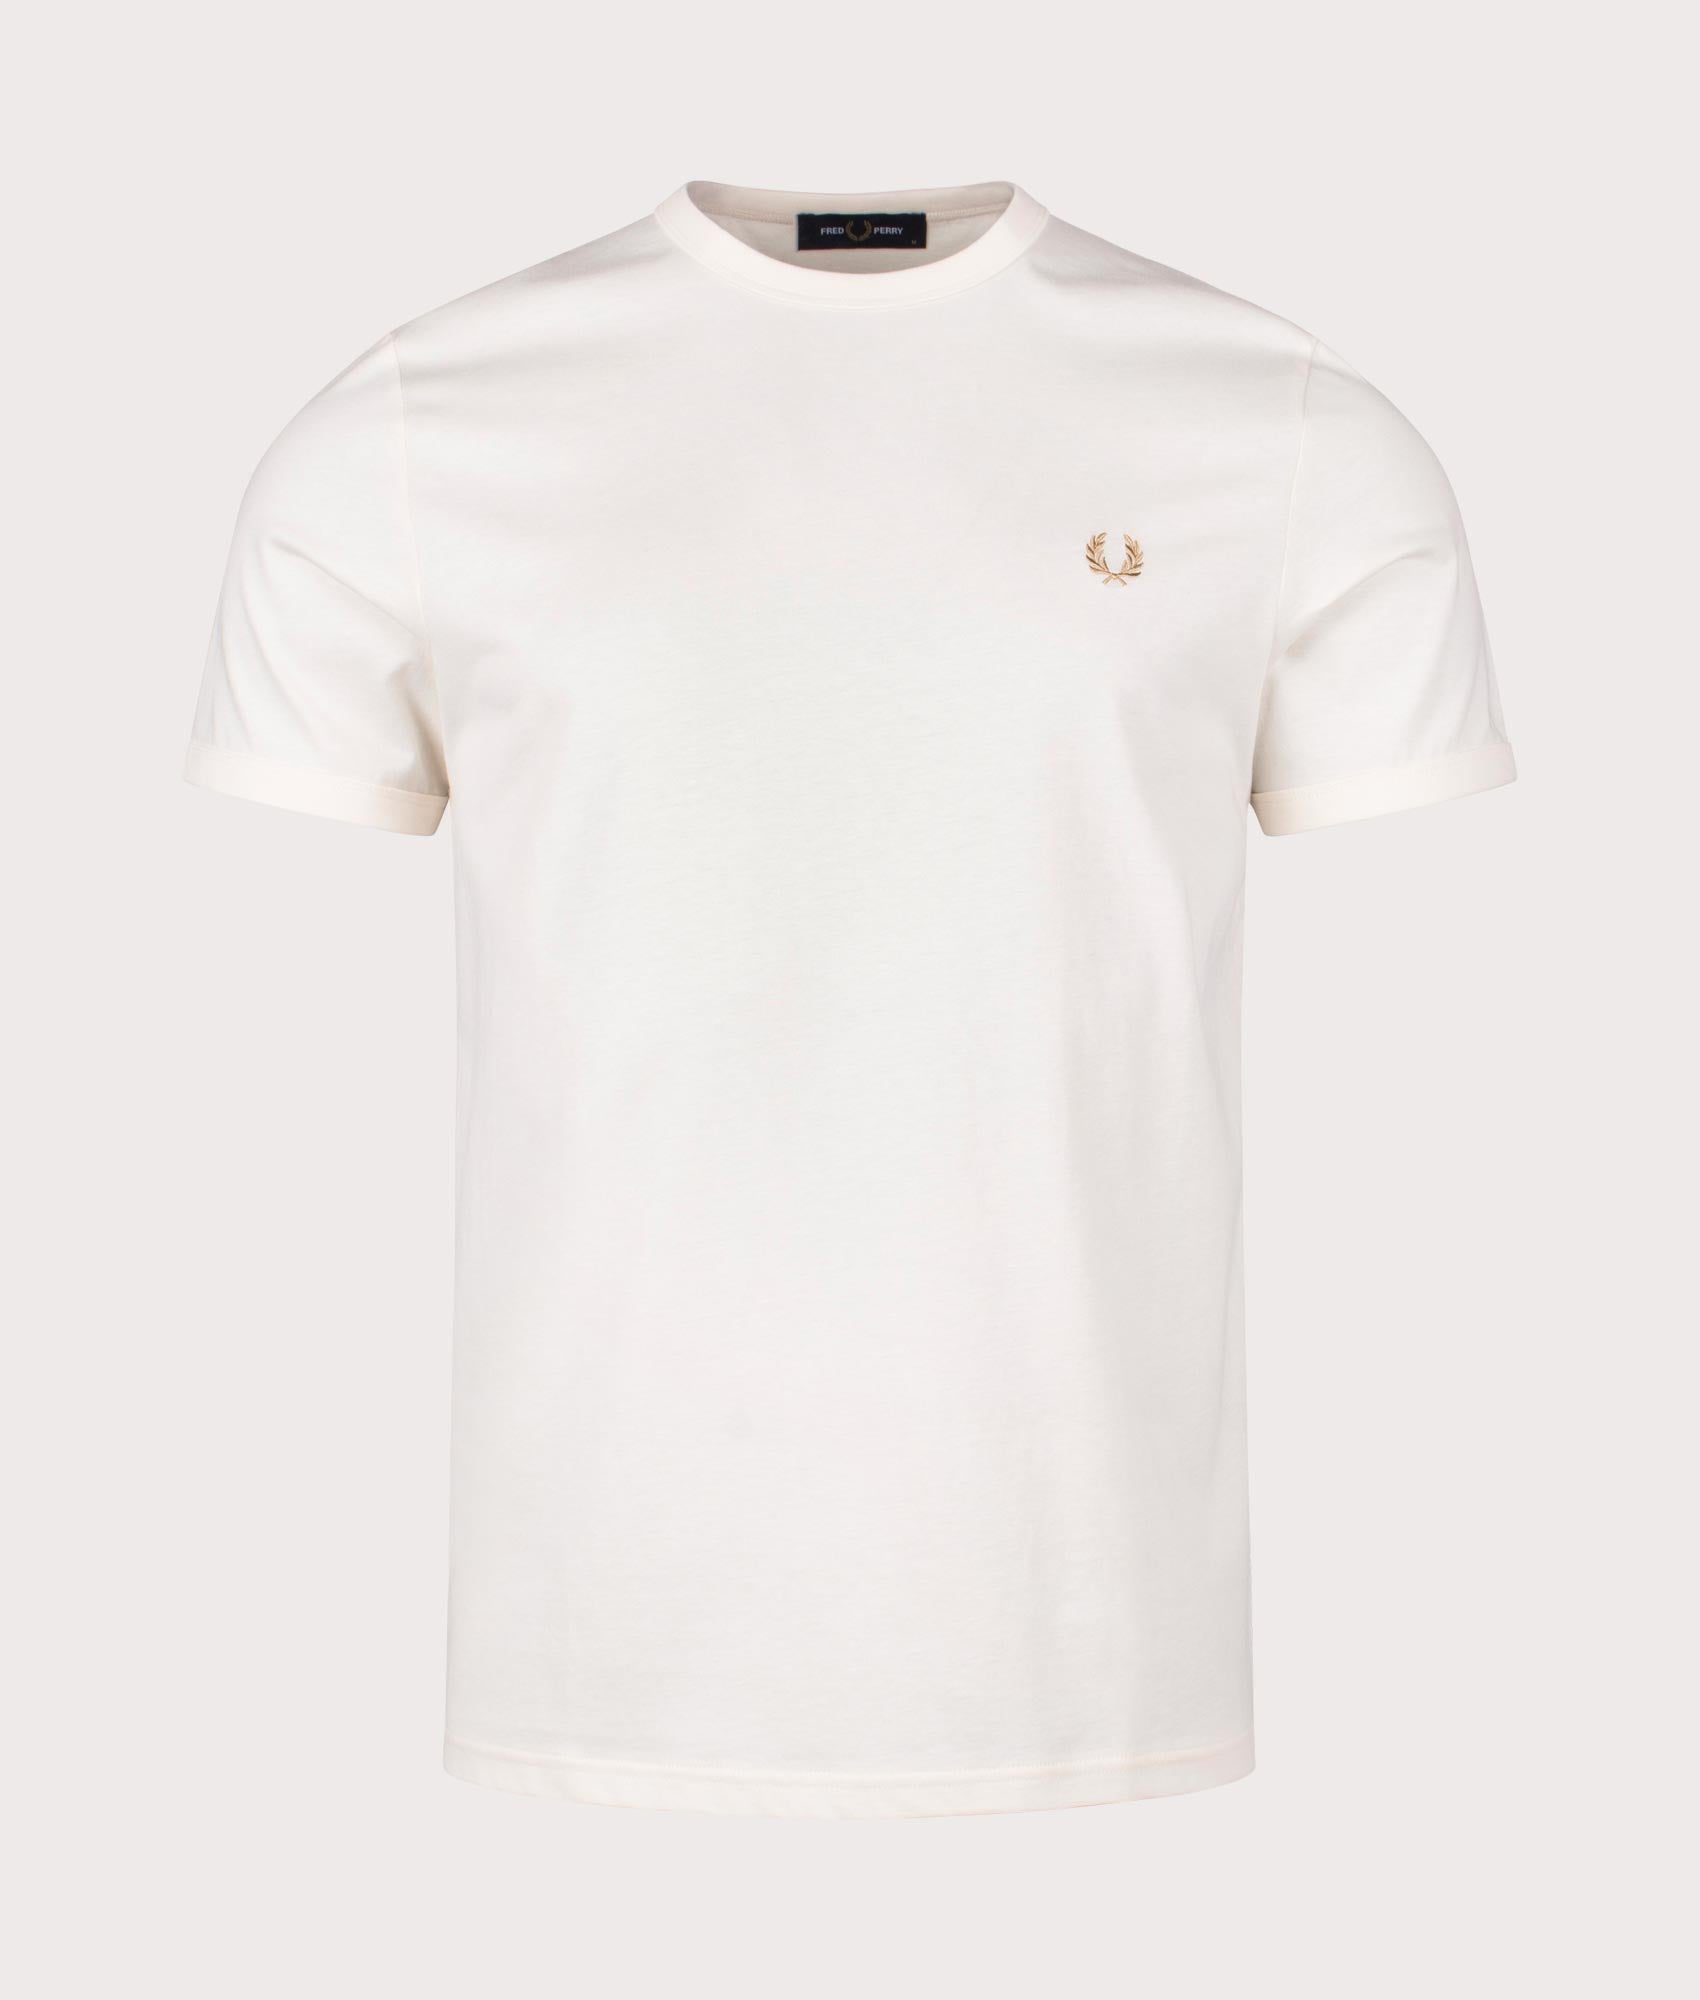 Fred Perry Mens Ringer T-Shirt - Colour: S64 Ecru - Size: XXL